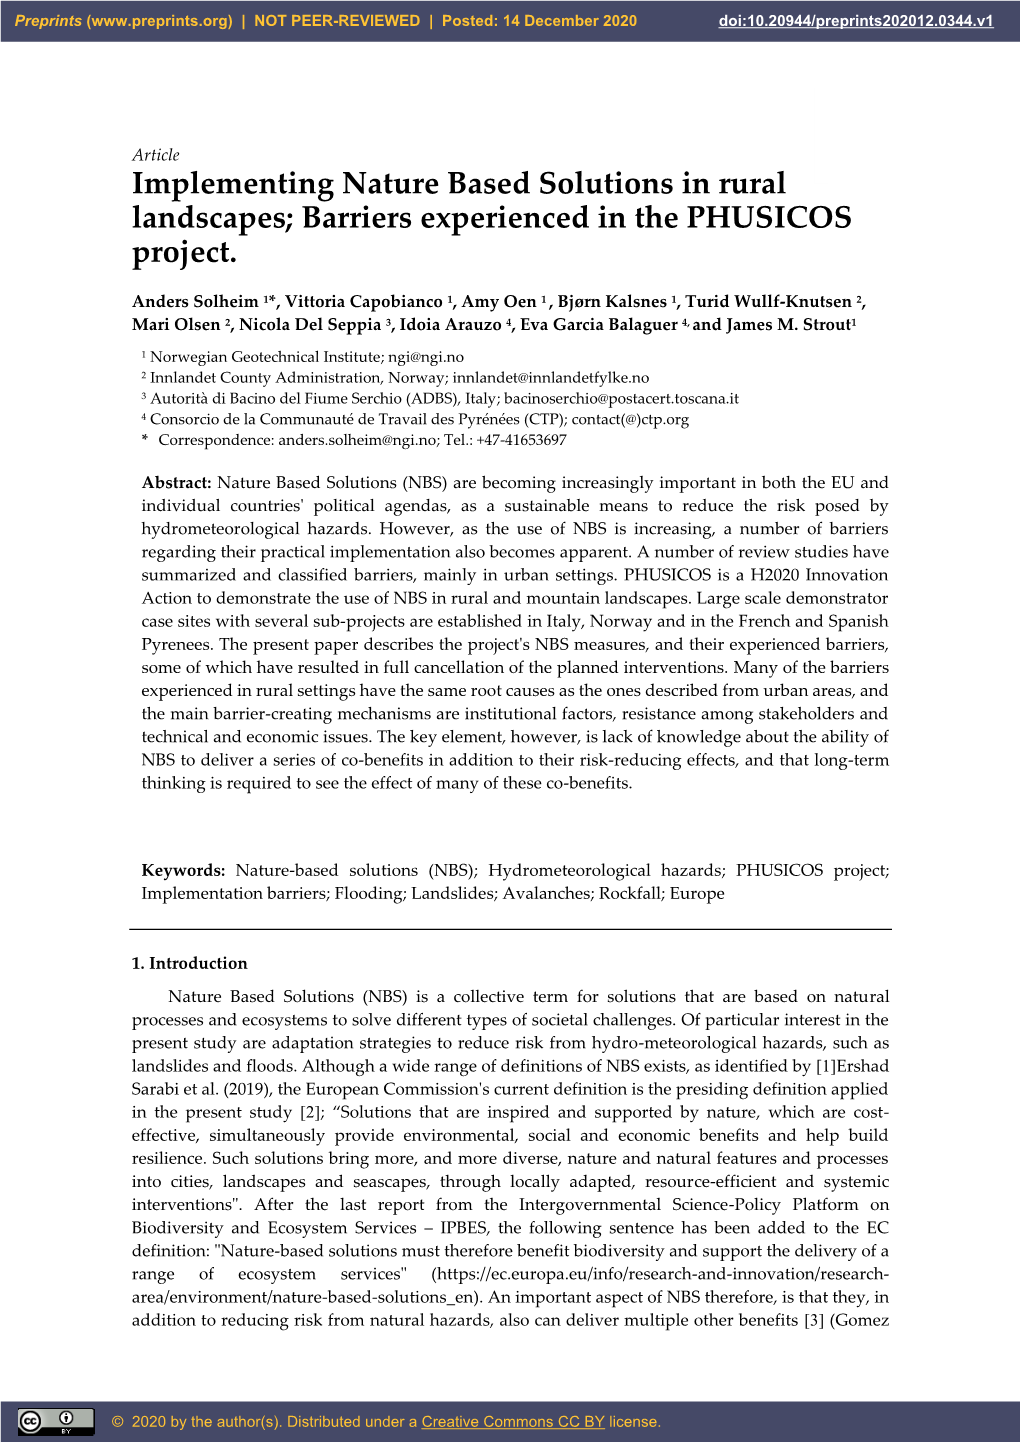 Implementing Nature Based Solutions in Rural Landscapes; Barriers Experienced in the PHUSICOS Project